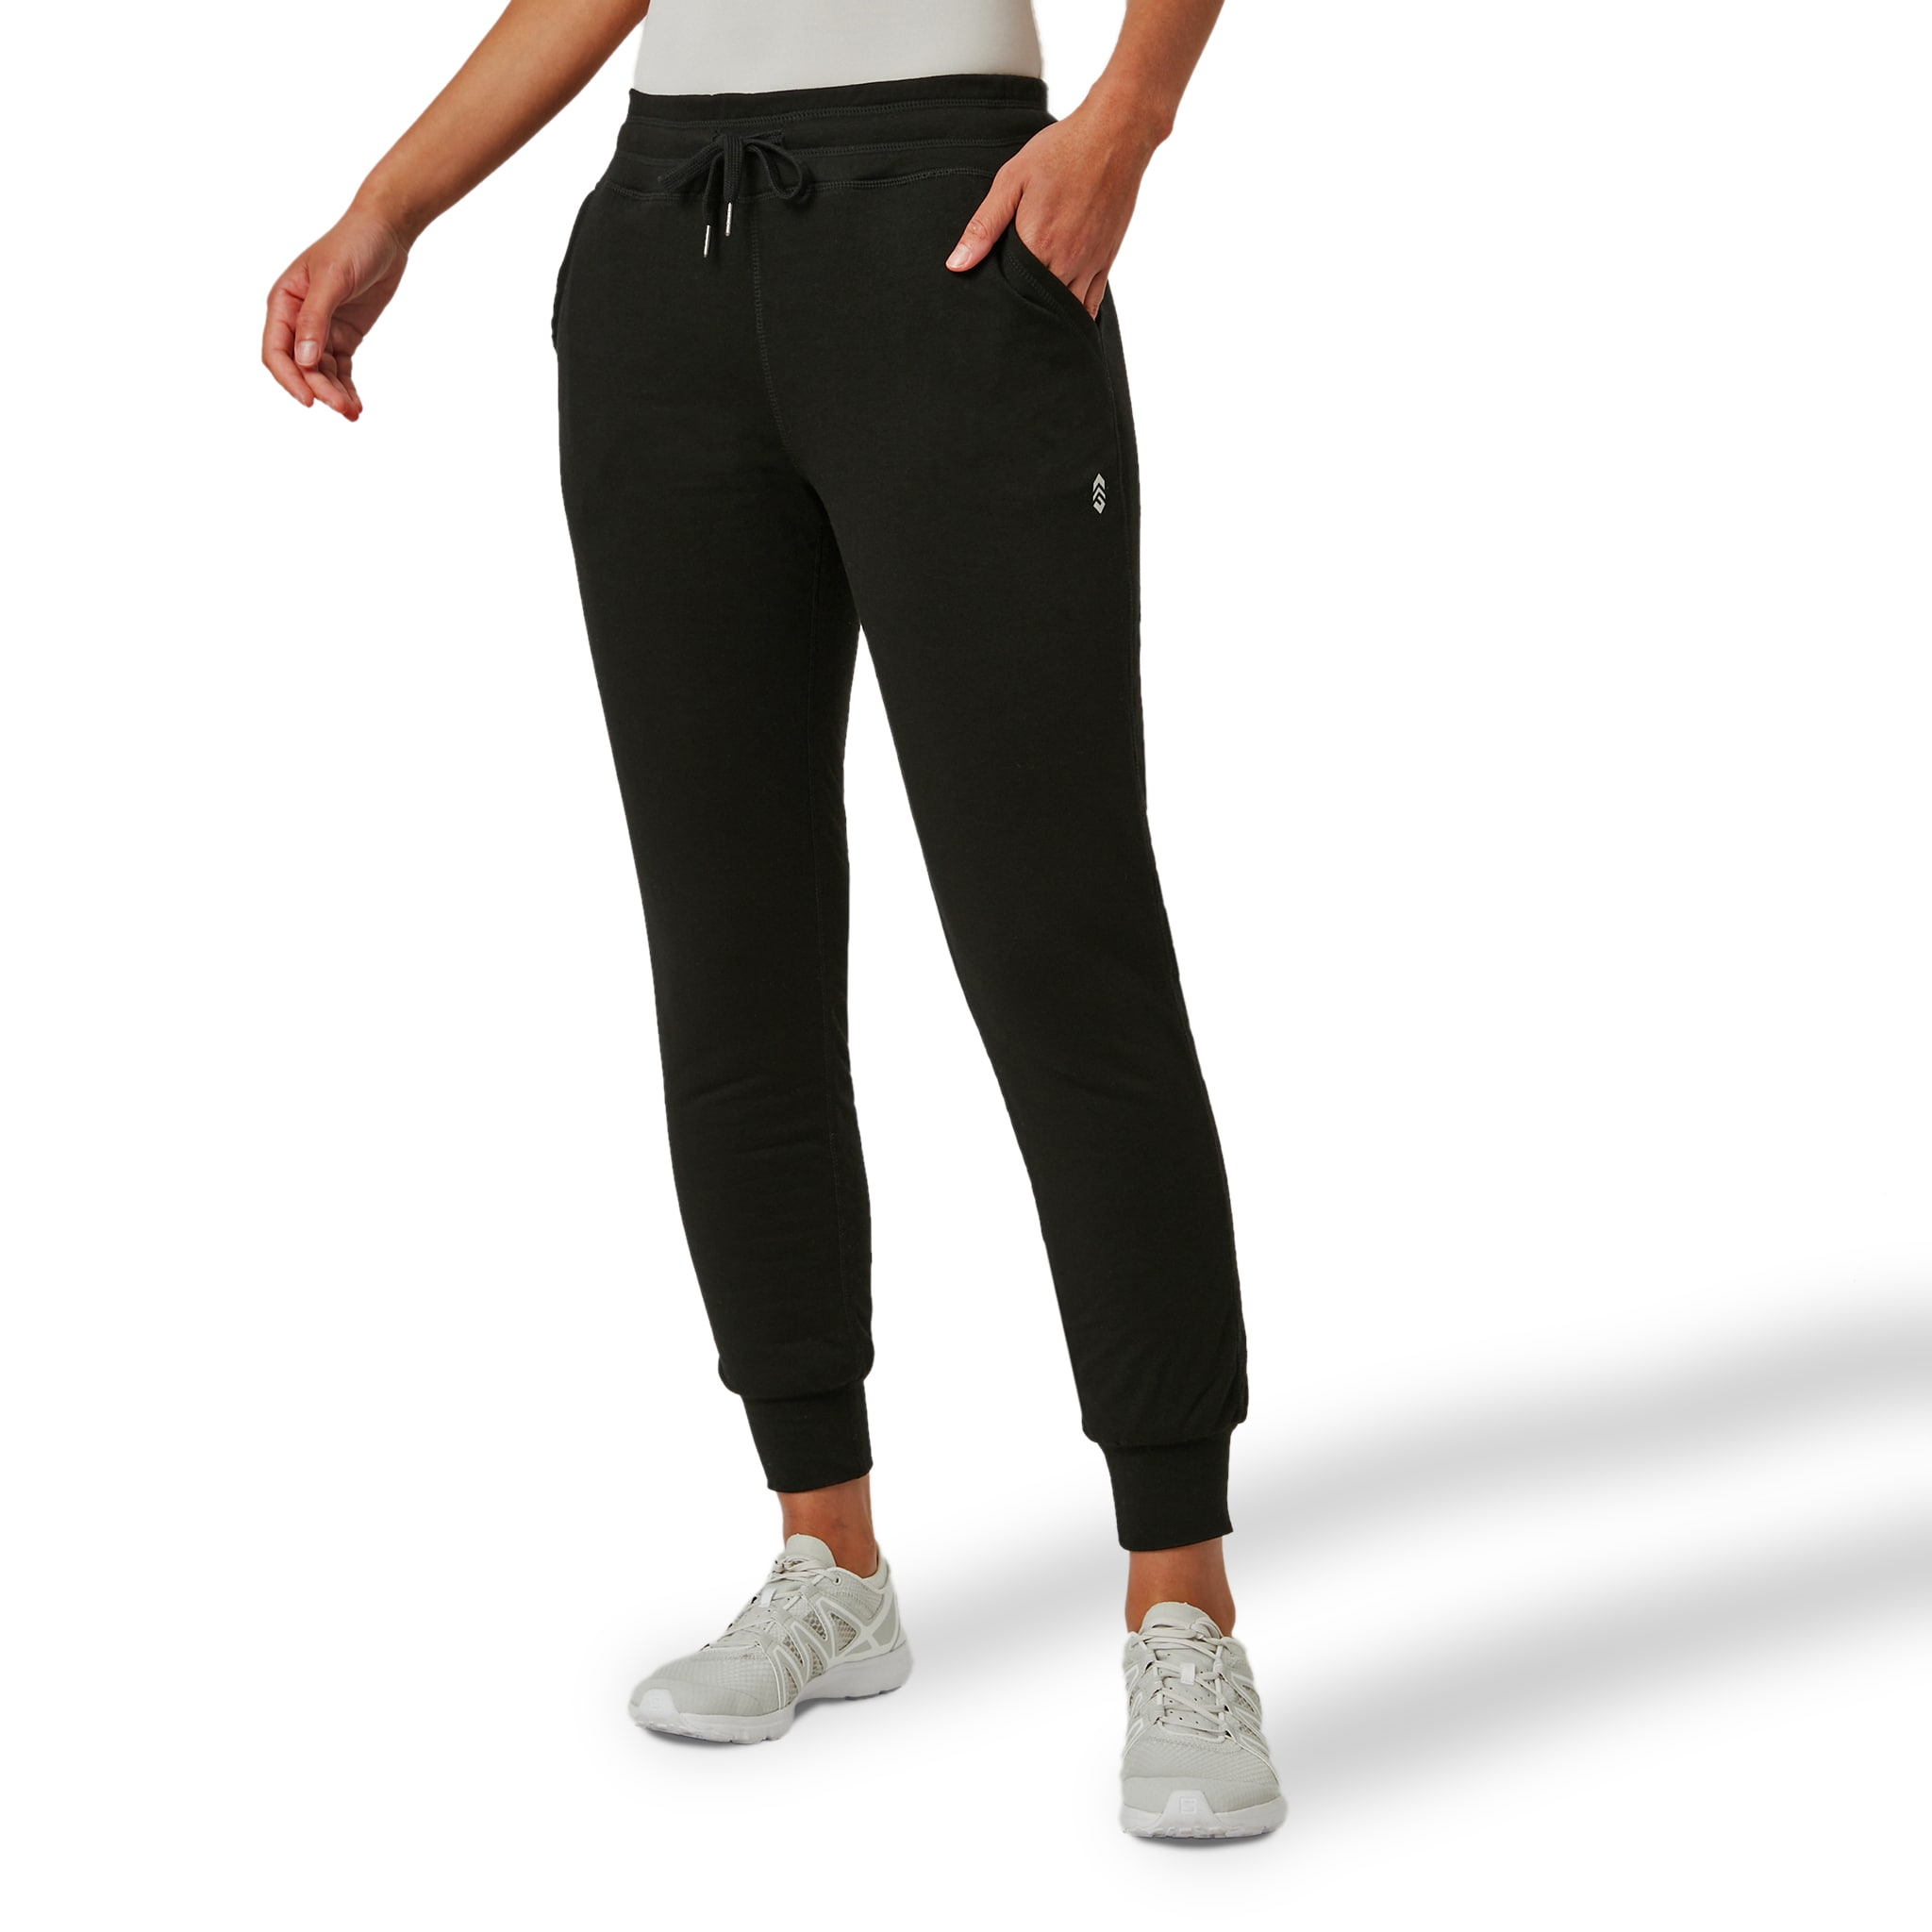 Free Country Women's Luxe Jogger Pants - Black L, Large Size, Multi Color,  Polyester Blend, Water Resistant, Imported Fabric - Warm, Comfortable, High  Quality at